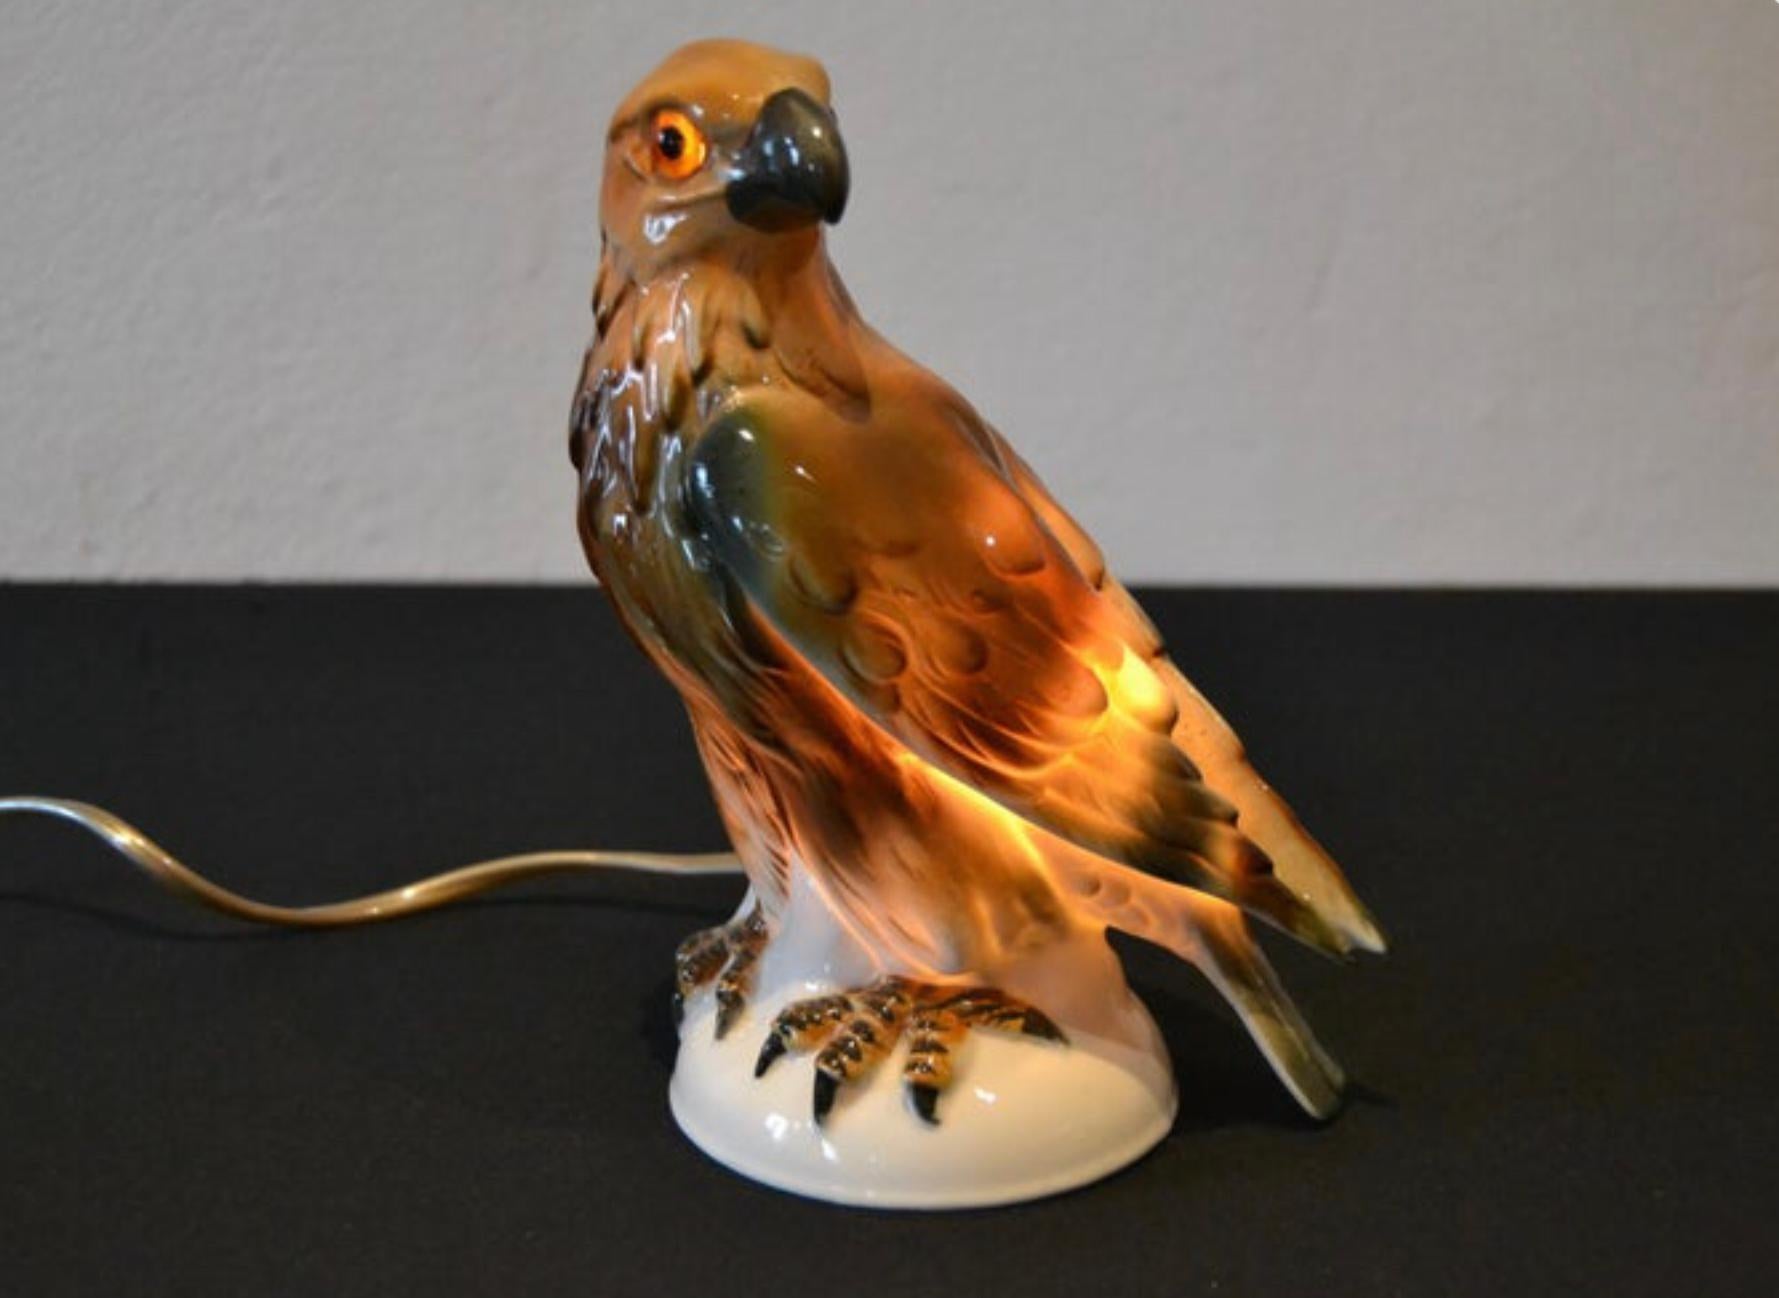 Porcelain eagle perfume light circa 1930s. 
A great looking perfume lamp in the shape of an eagle bird. 
A perfume lamp of a porcelain eagle sculpture with glass eyes.
This animal statue, animal light, bird lamp dates from the Art Deco period where